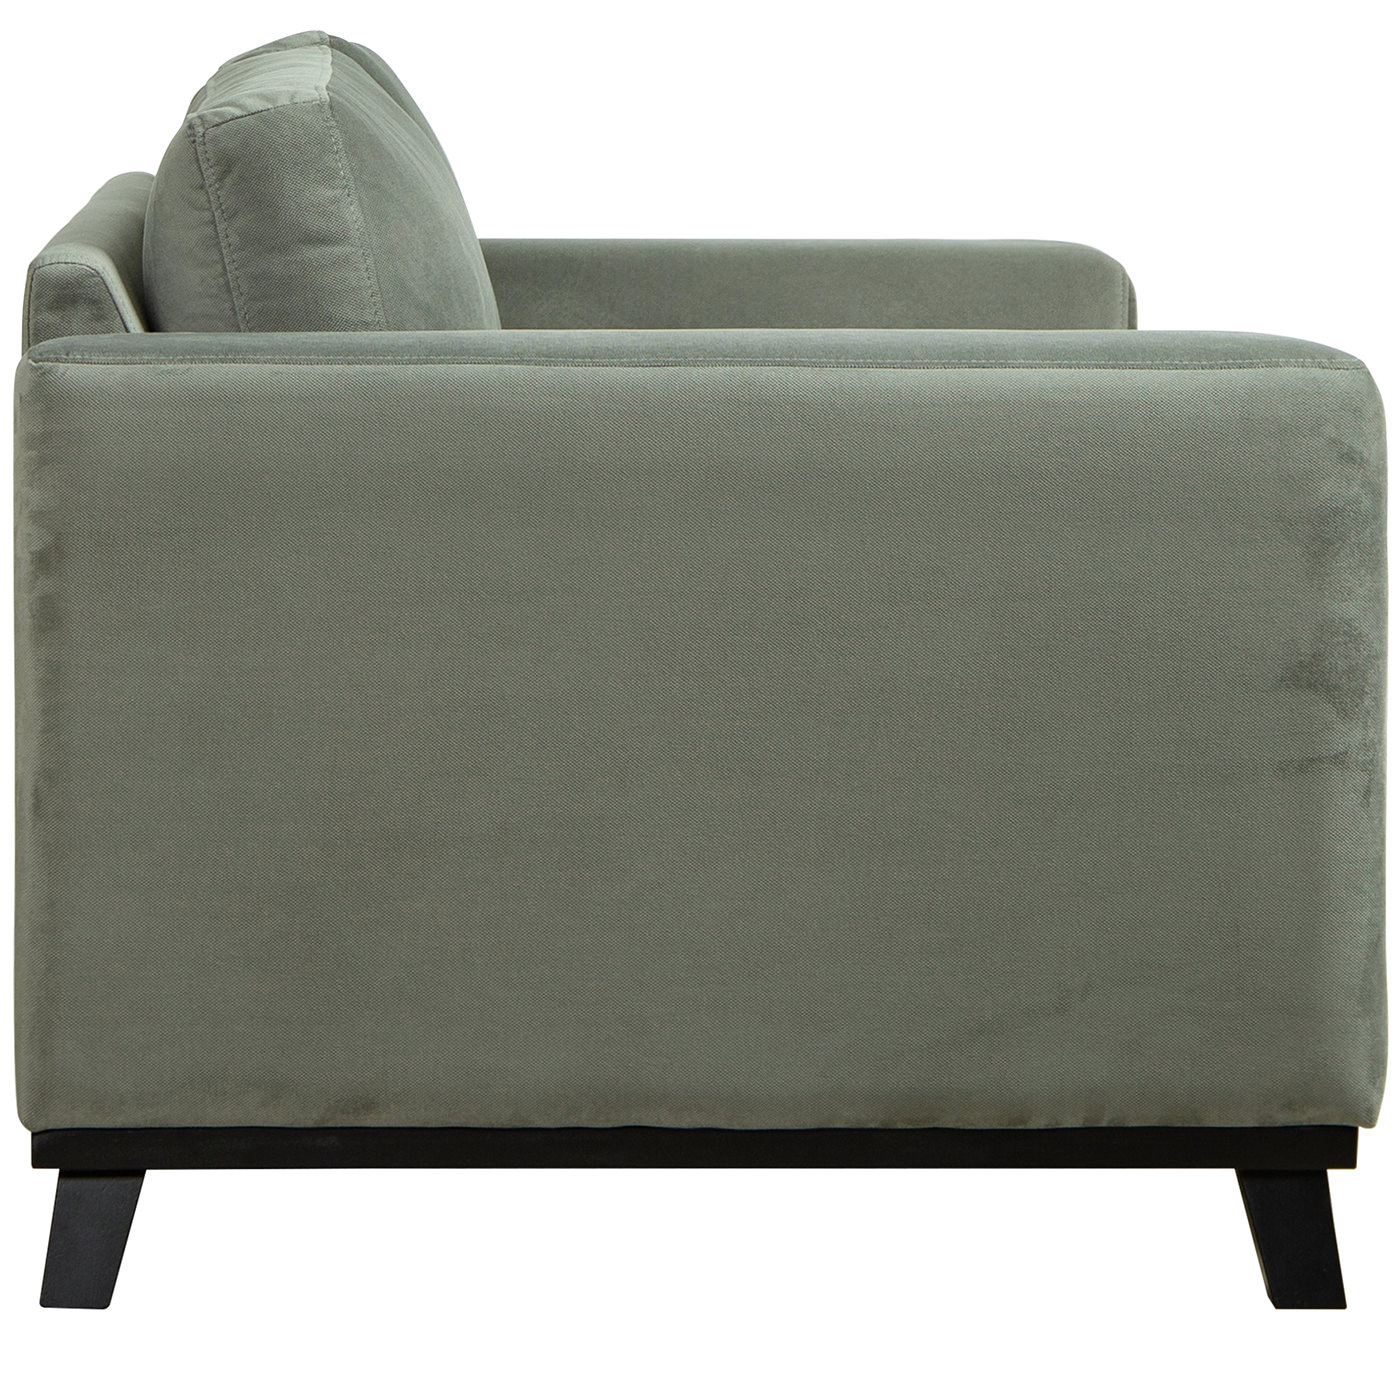 SI 1739 295 10 – Canberra 3S Sofa MaxGreyGreen Black Stained Wood (3)